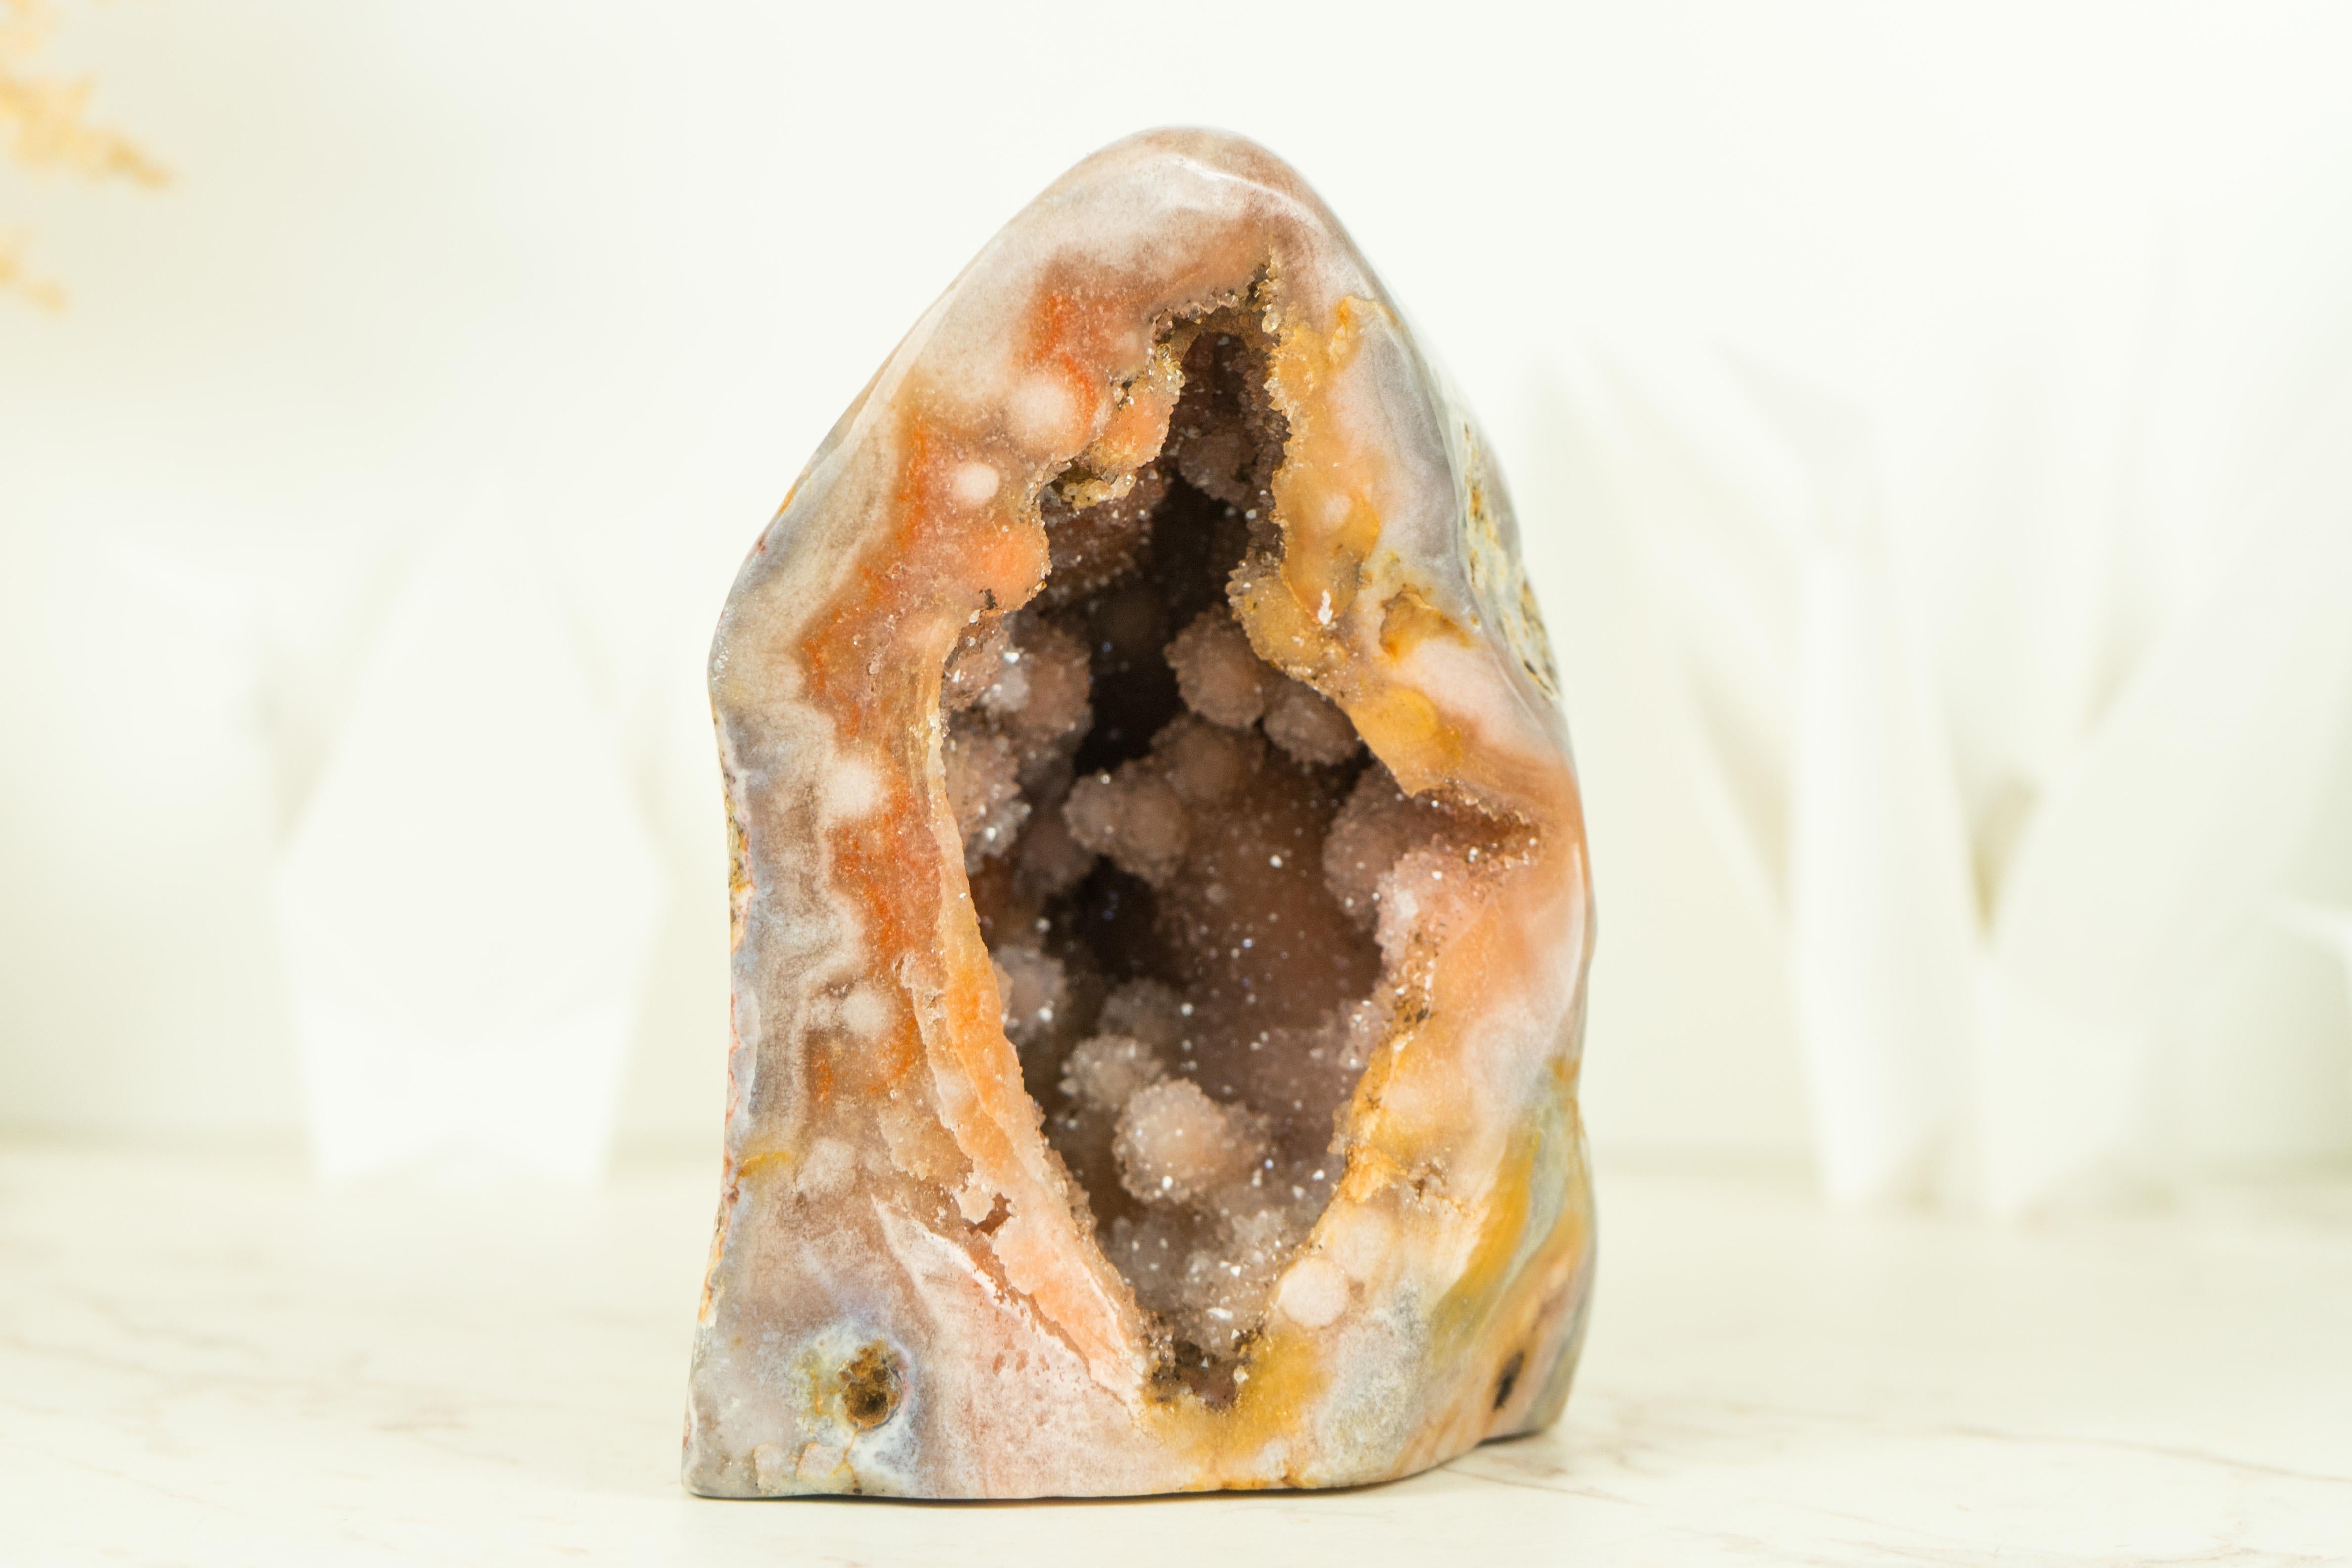 A stunning small self-standing Pink Amethyst geode, featuring a naturally formed sculpture with shiny Galaxy Pink Amethyst Druzy that will bring a sense of calm, harmony, and positivity into your home or office decor with its soothing and gentle